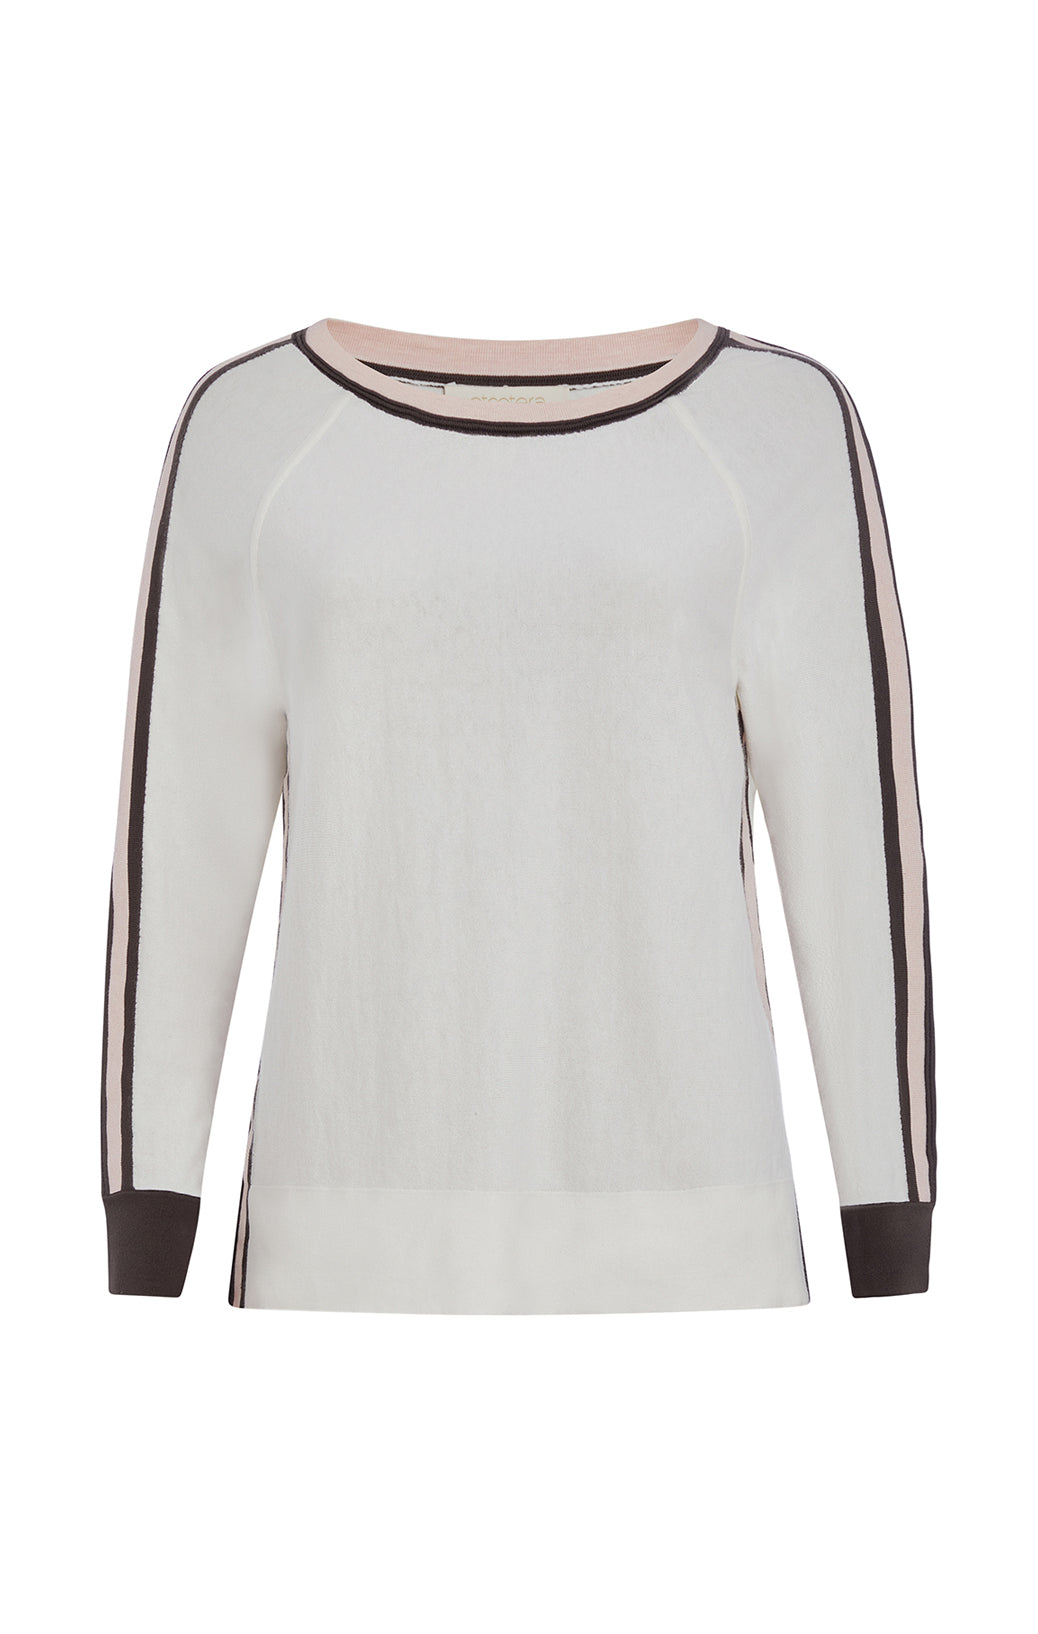 Andros - Striped Linen-Blend Pullover Knit Top - Product Image